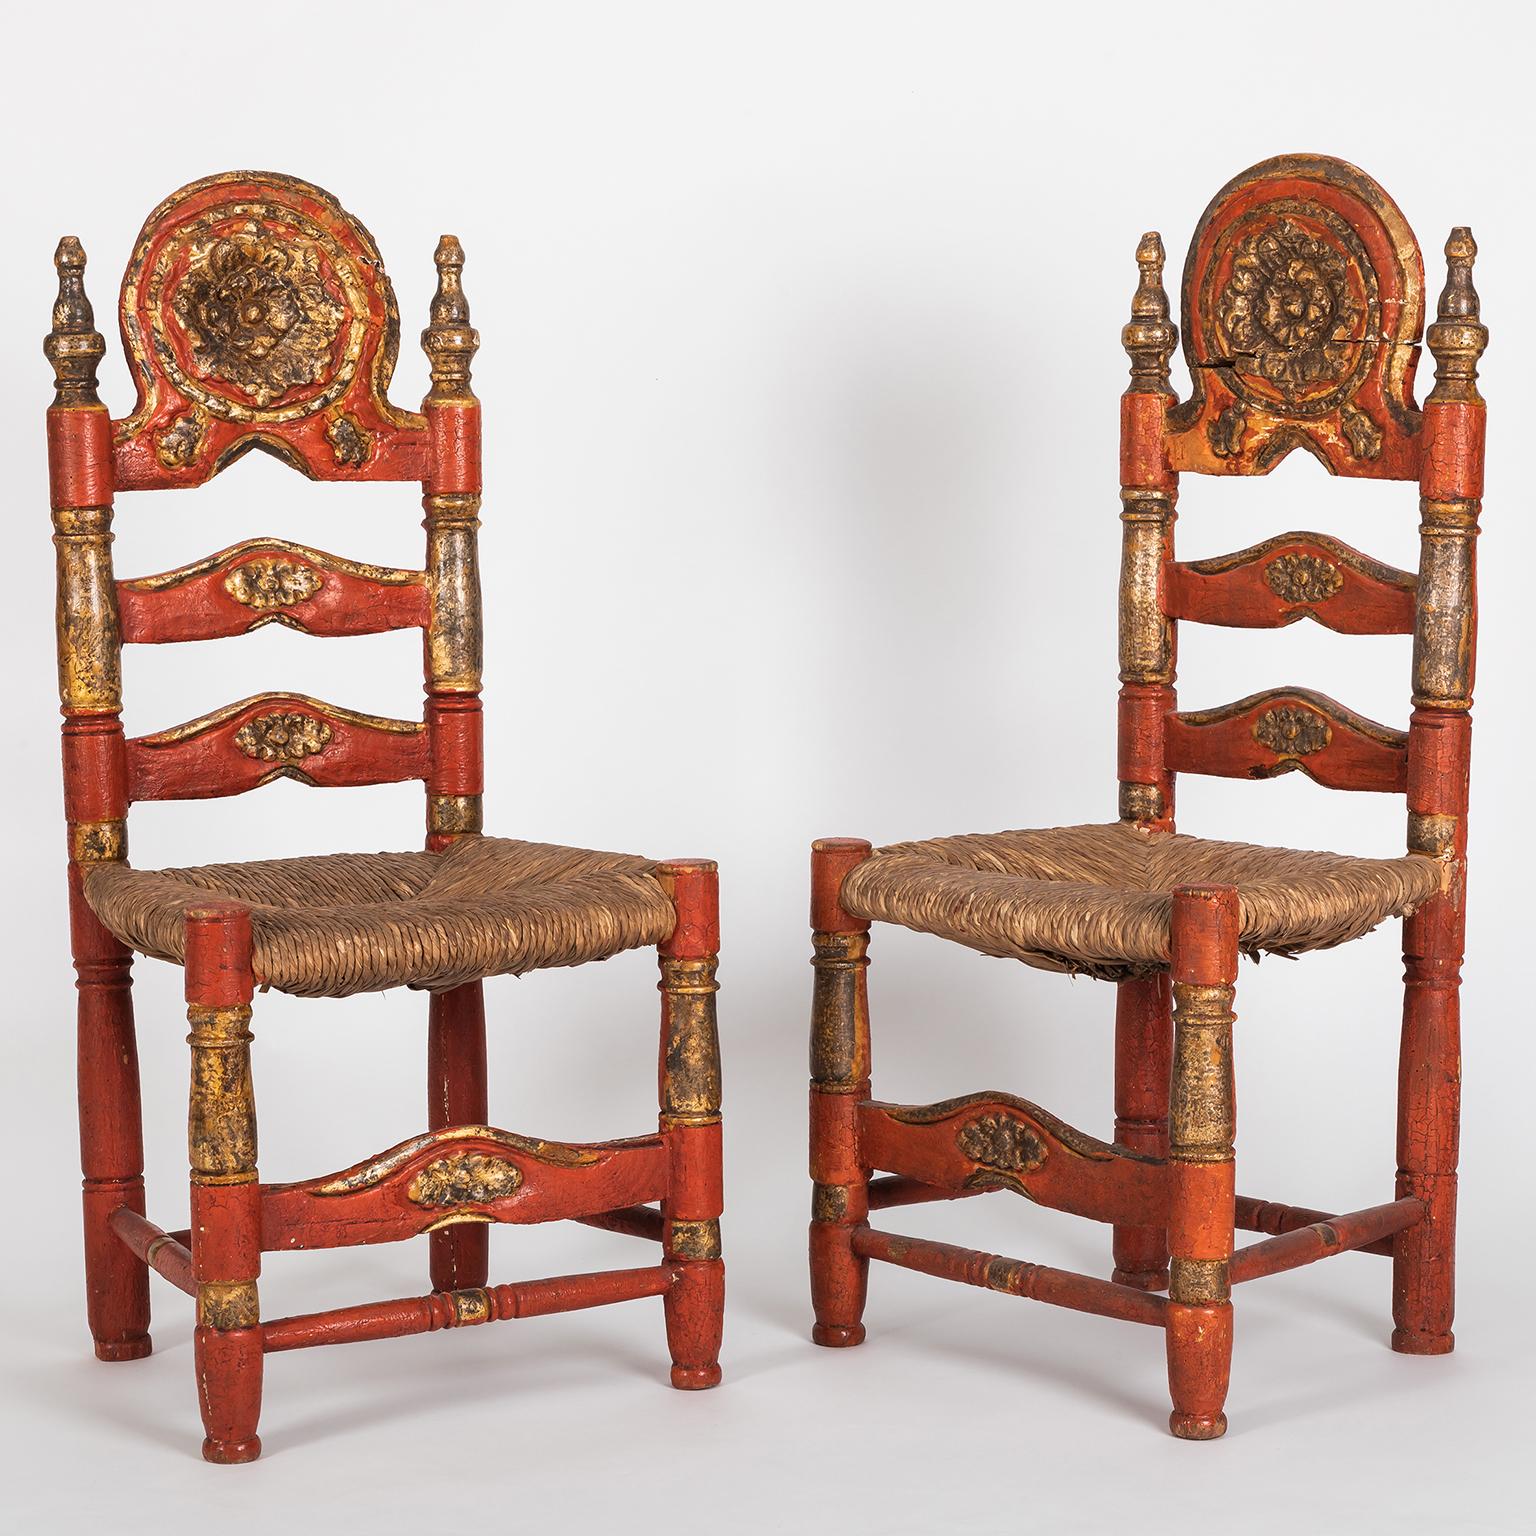 Beautiful and rare pair of Spanish Colonial style ladderback chairs hand painted in red and gold.
The wood from the structure is completely hand carved and the seating is handwoven rush.
As you can see on the pictures, one of the backs of the